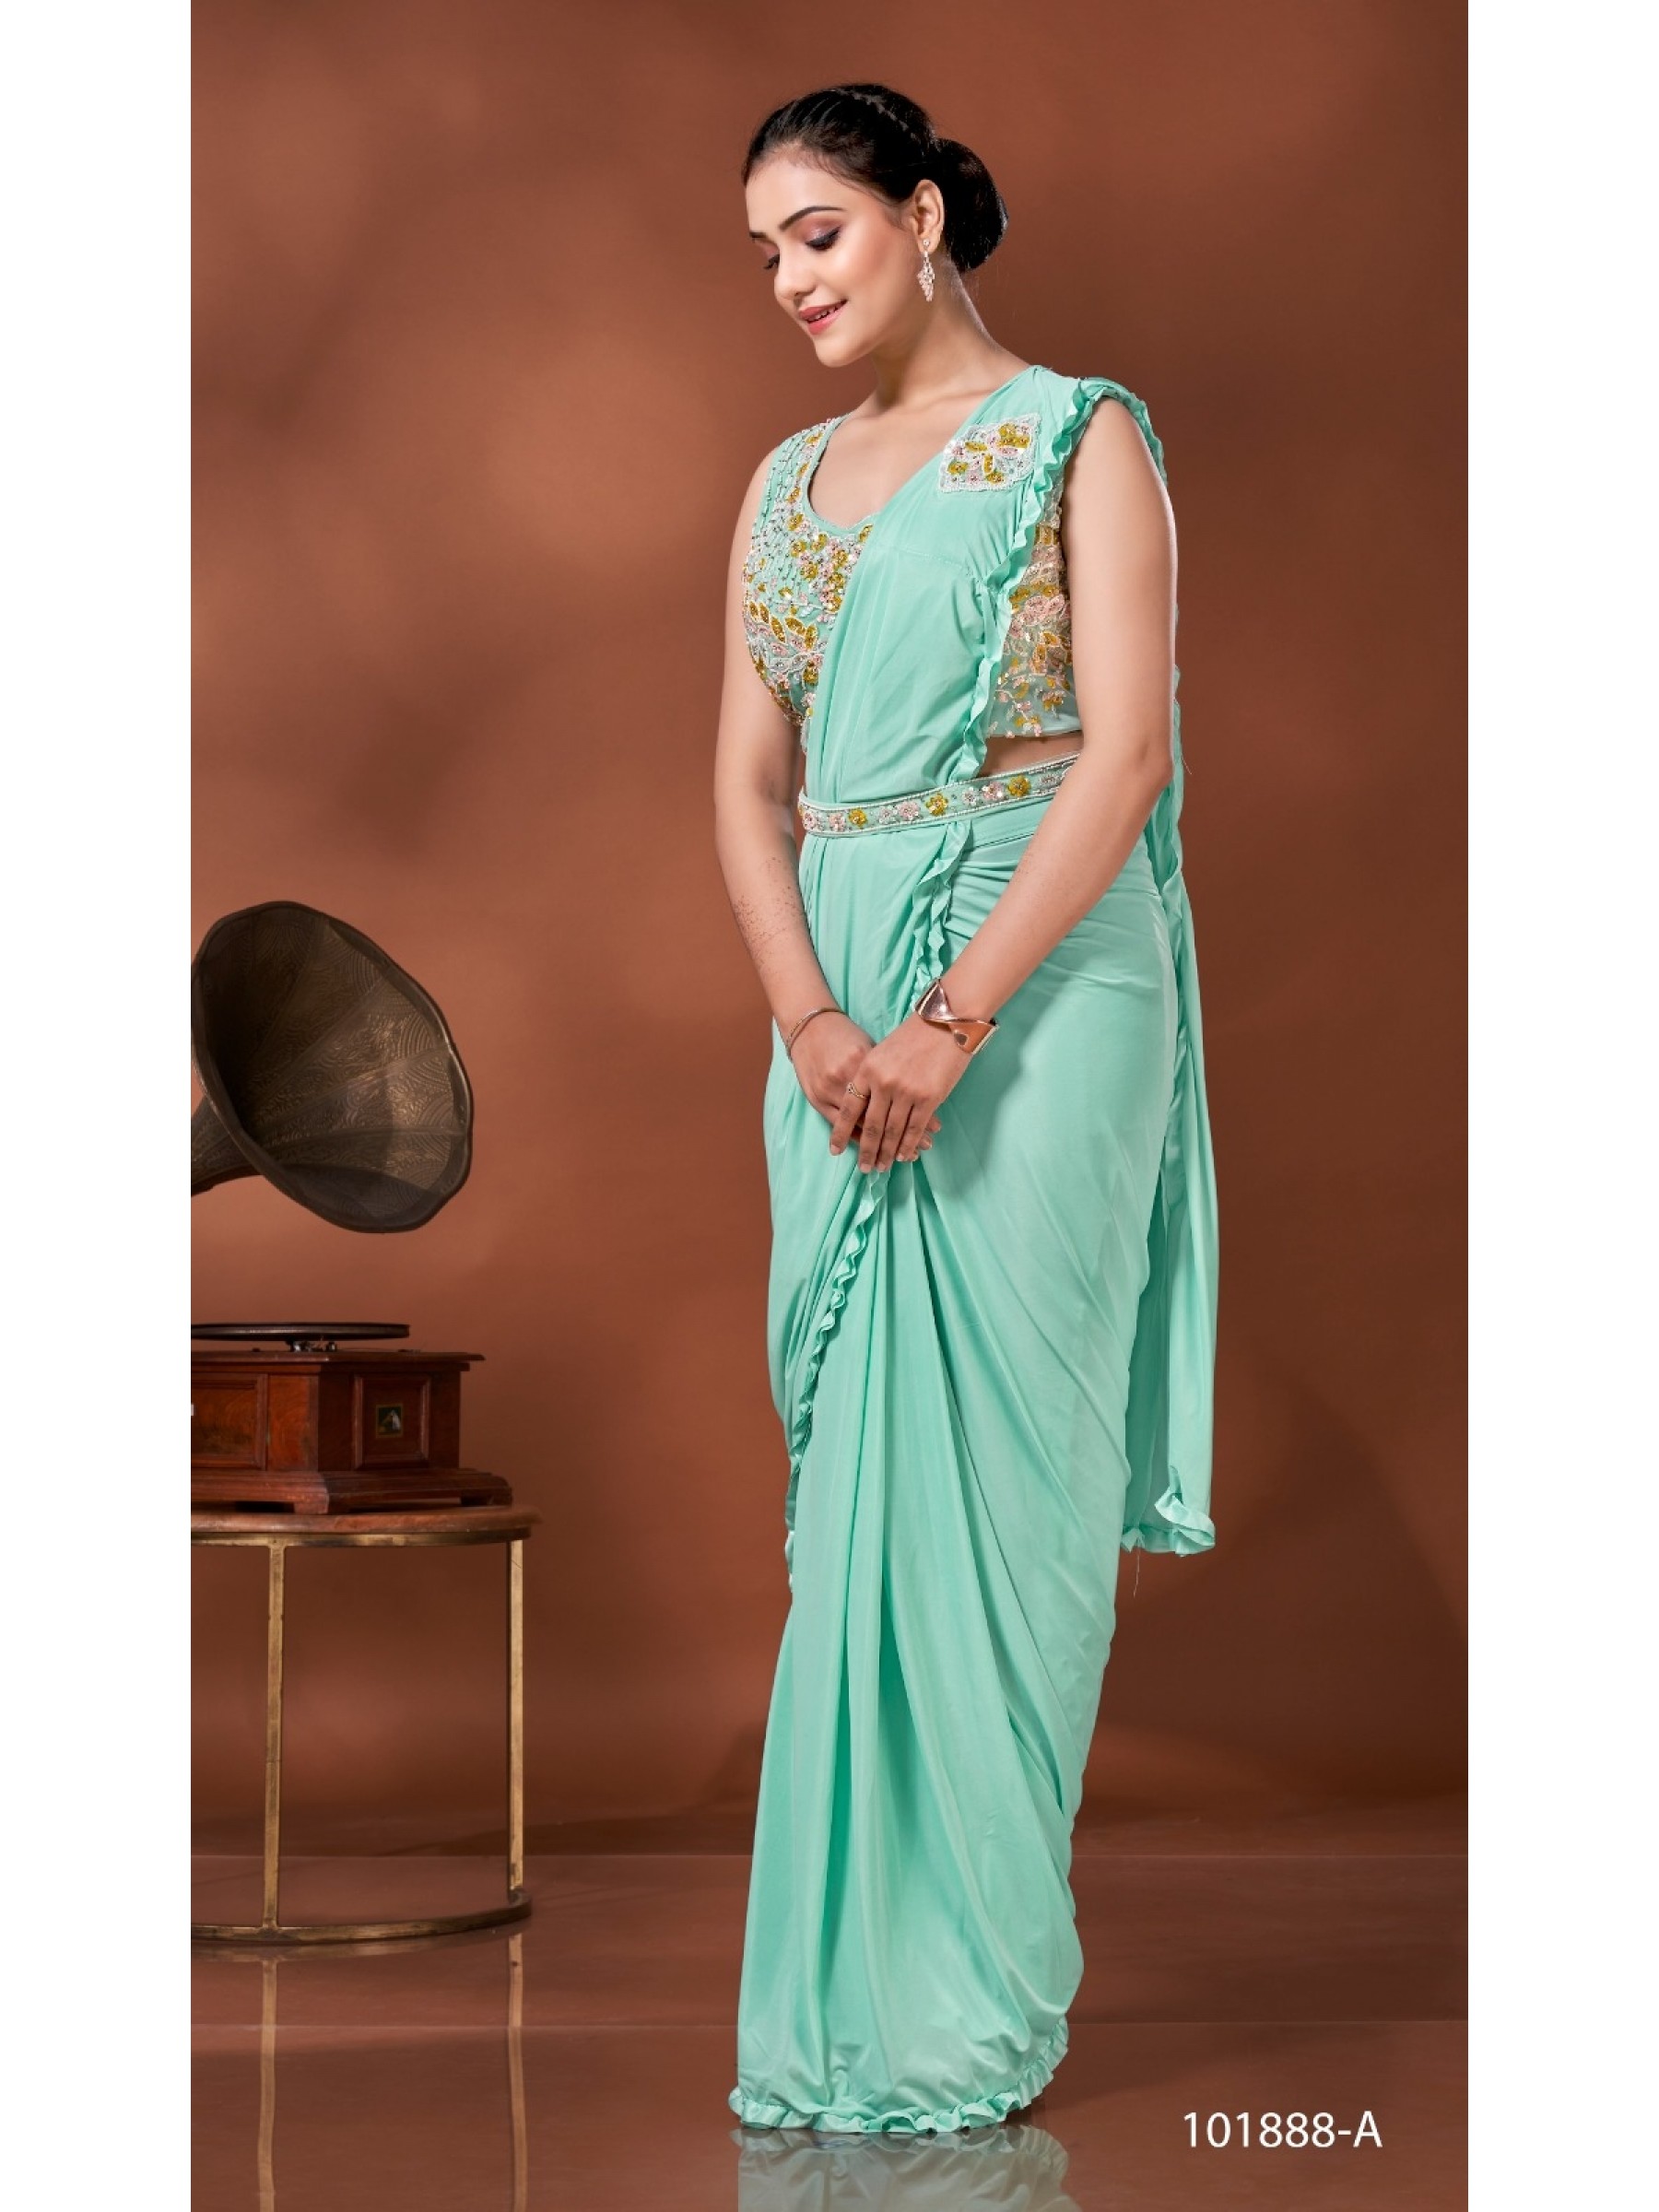 Shimmer Laycra  Fabric Party Wear  Saree In Turquoise Color With Embroidery Work